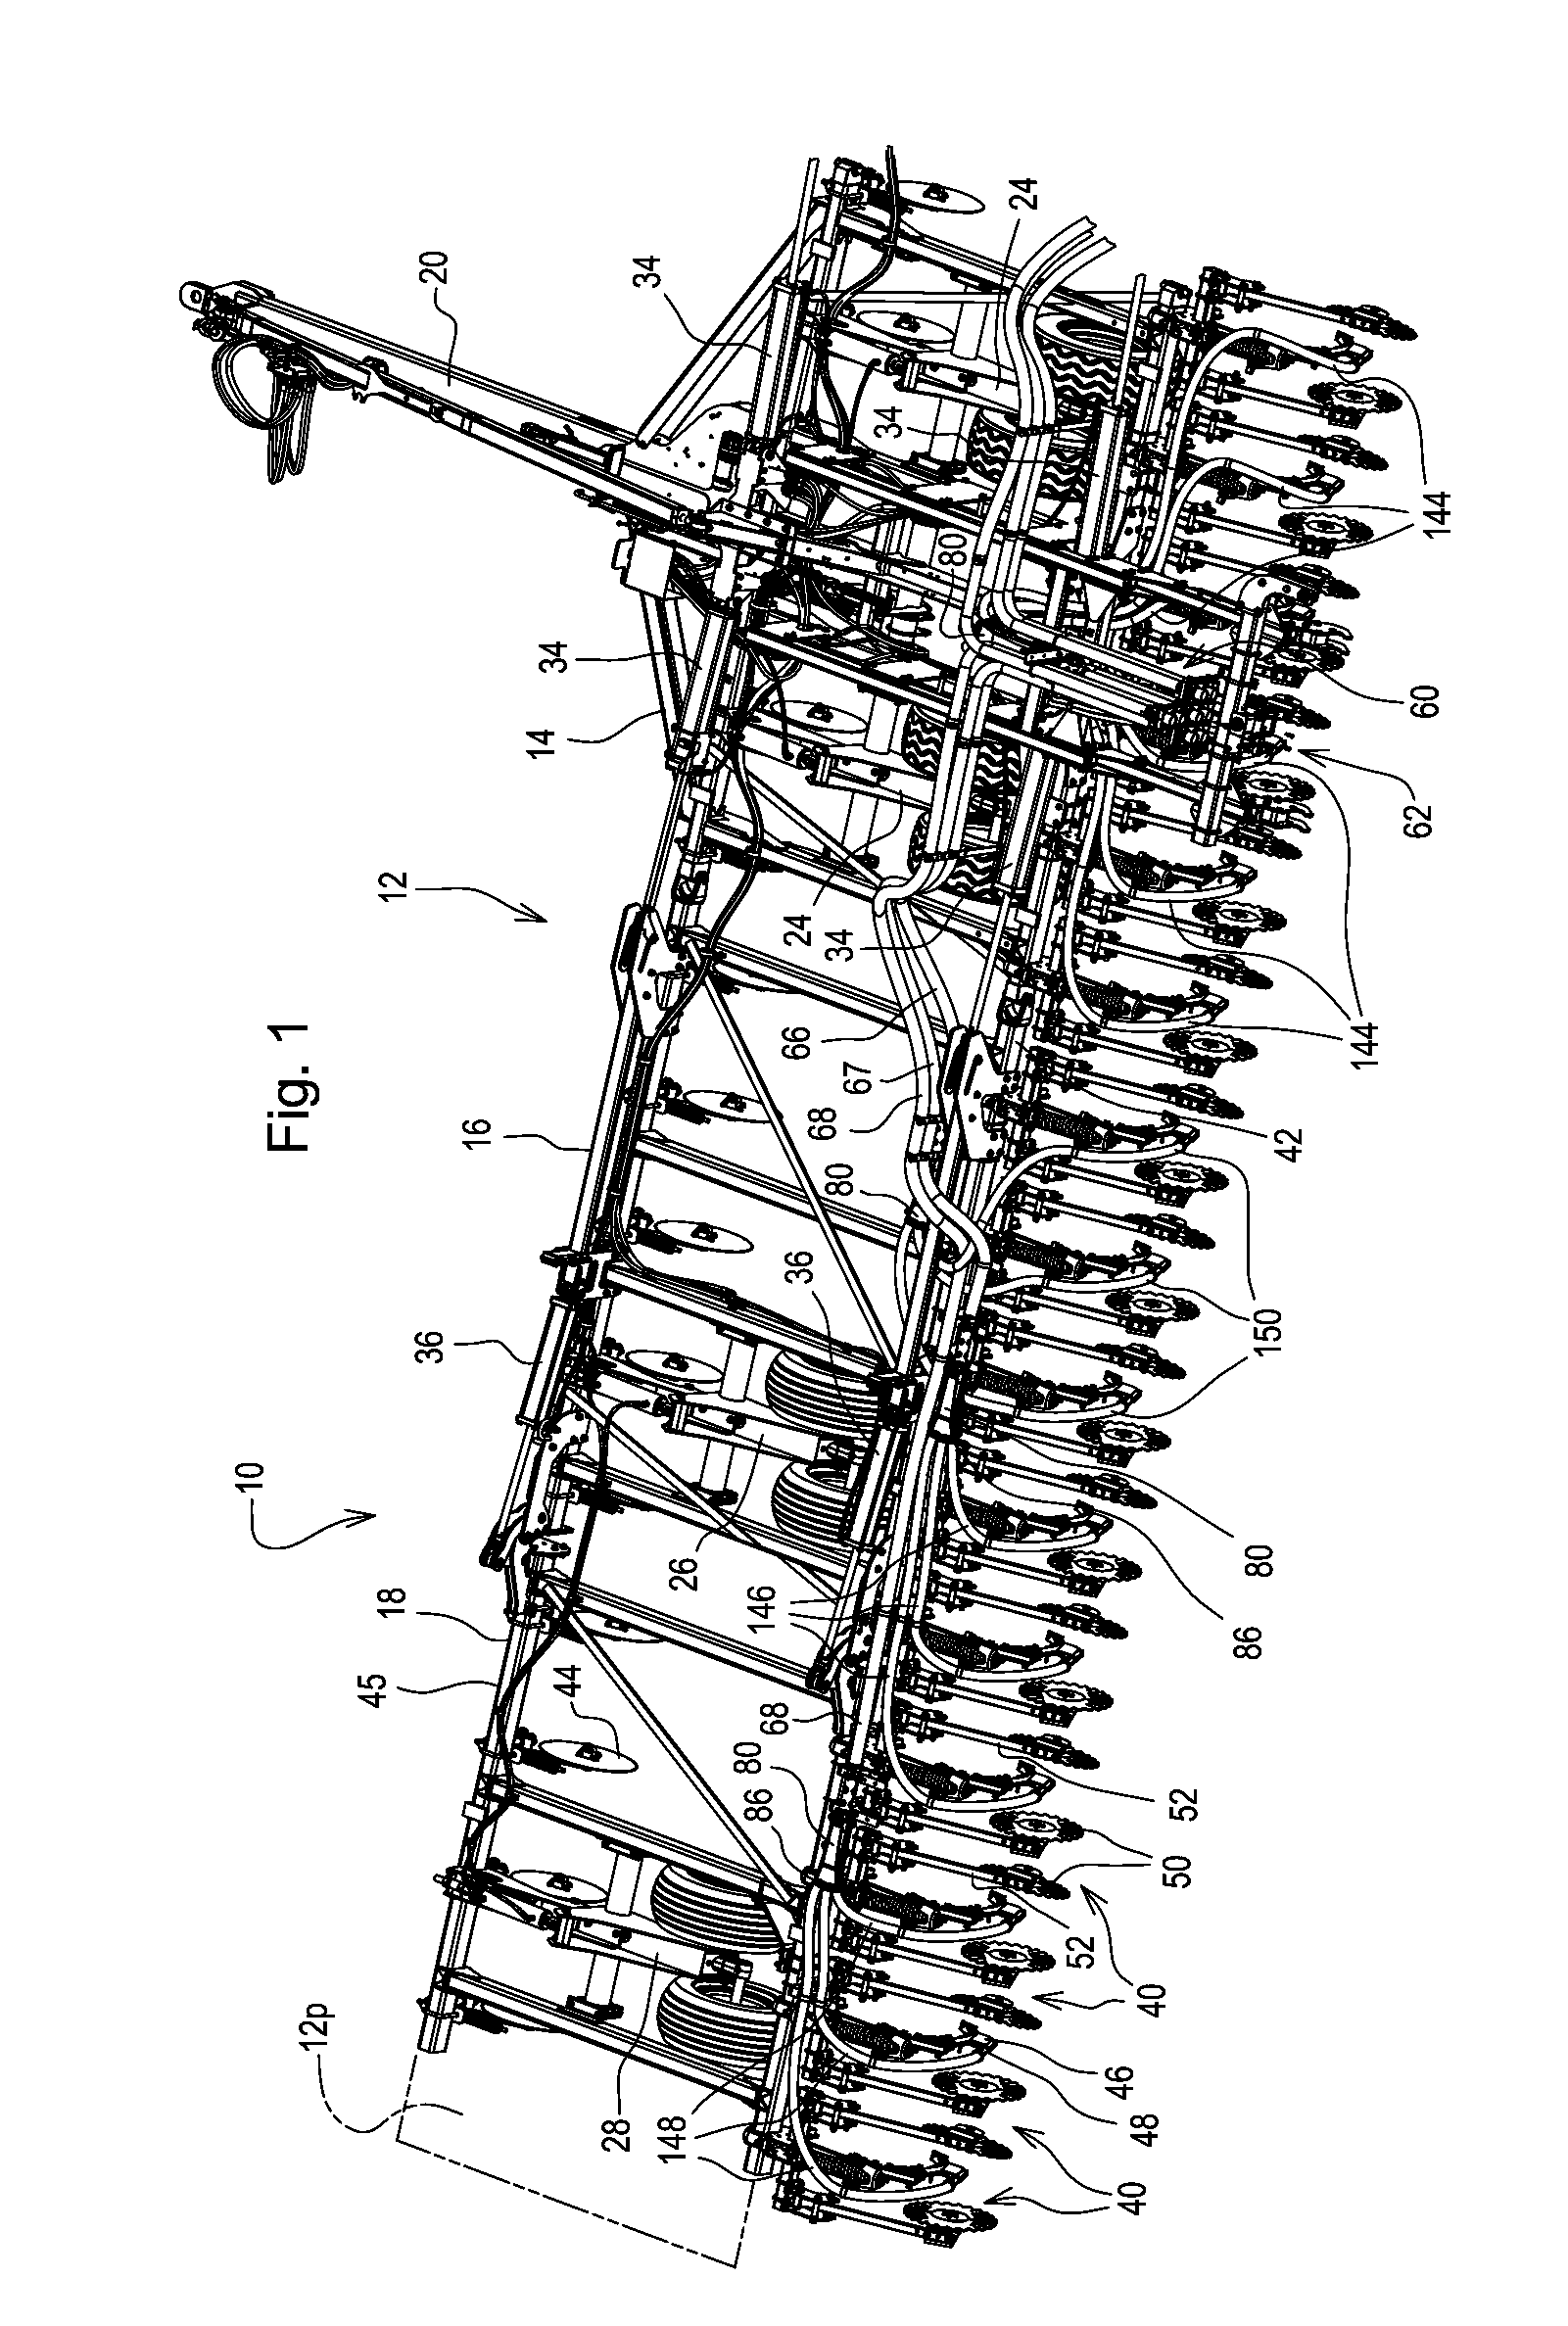 Commodity Splitter for an Air Delivery System